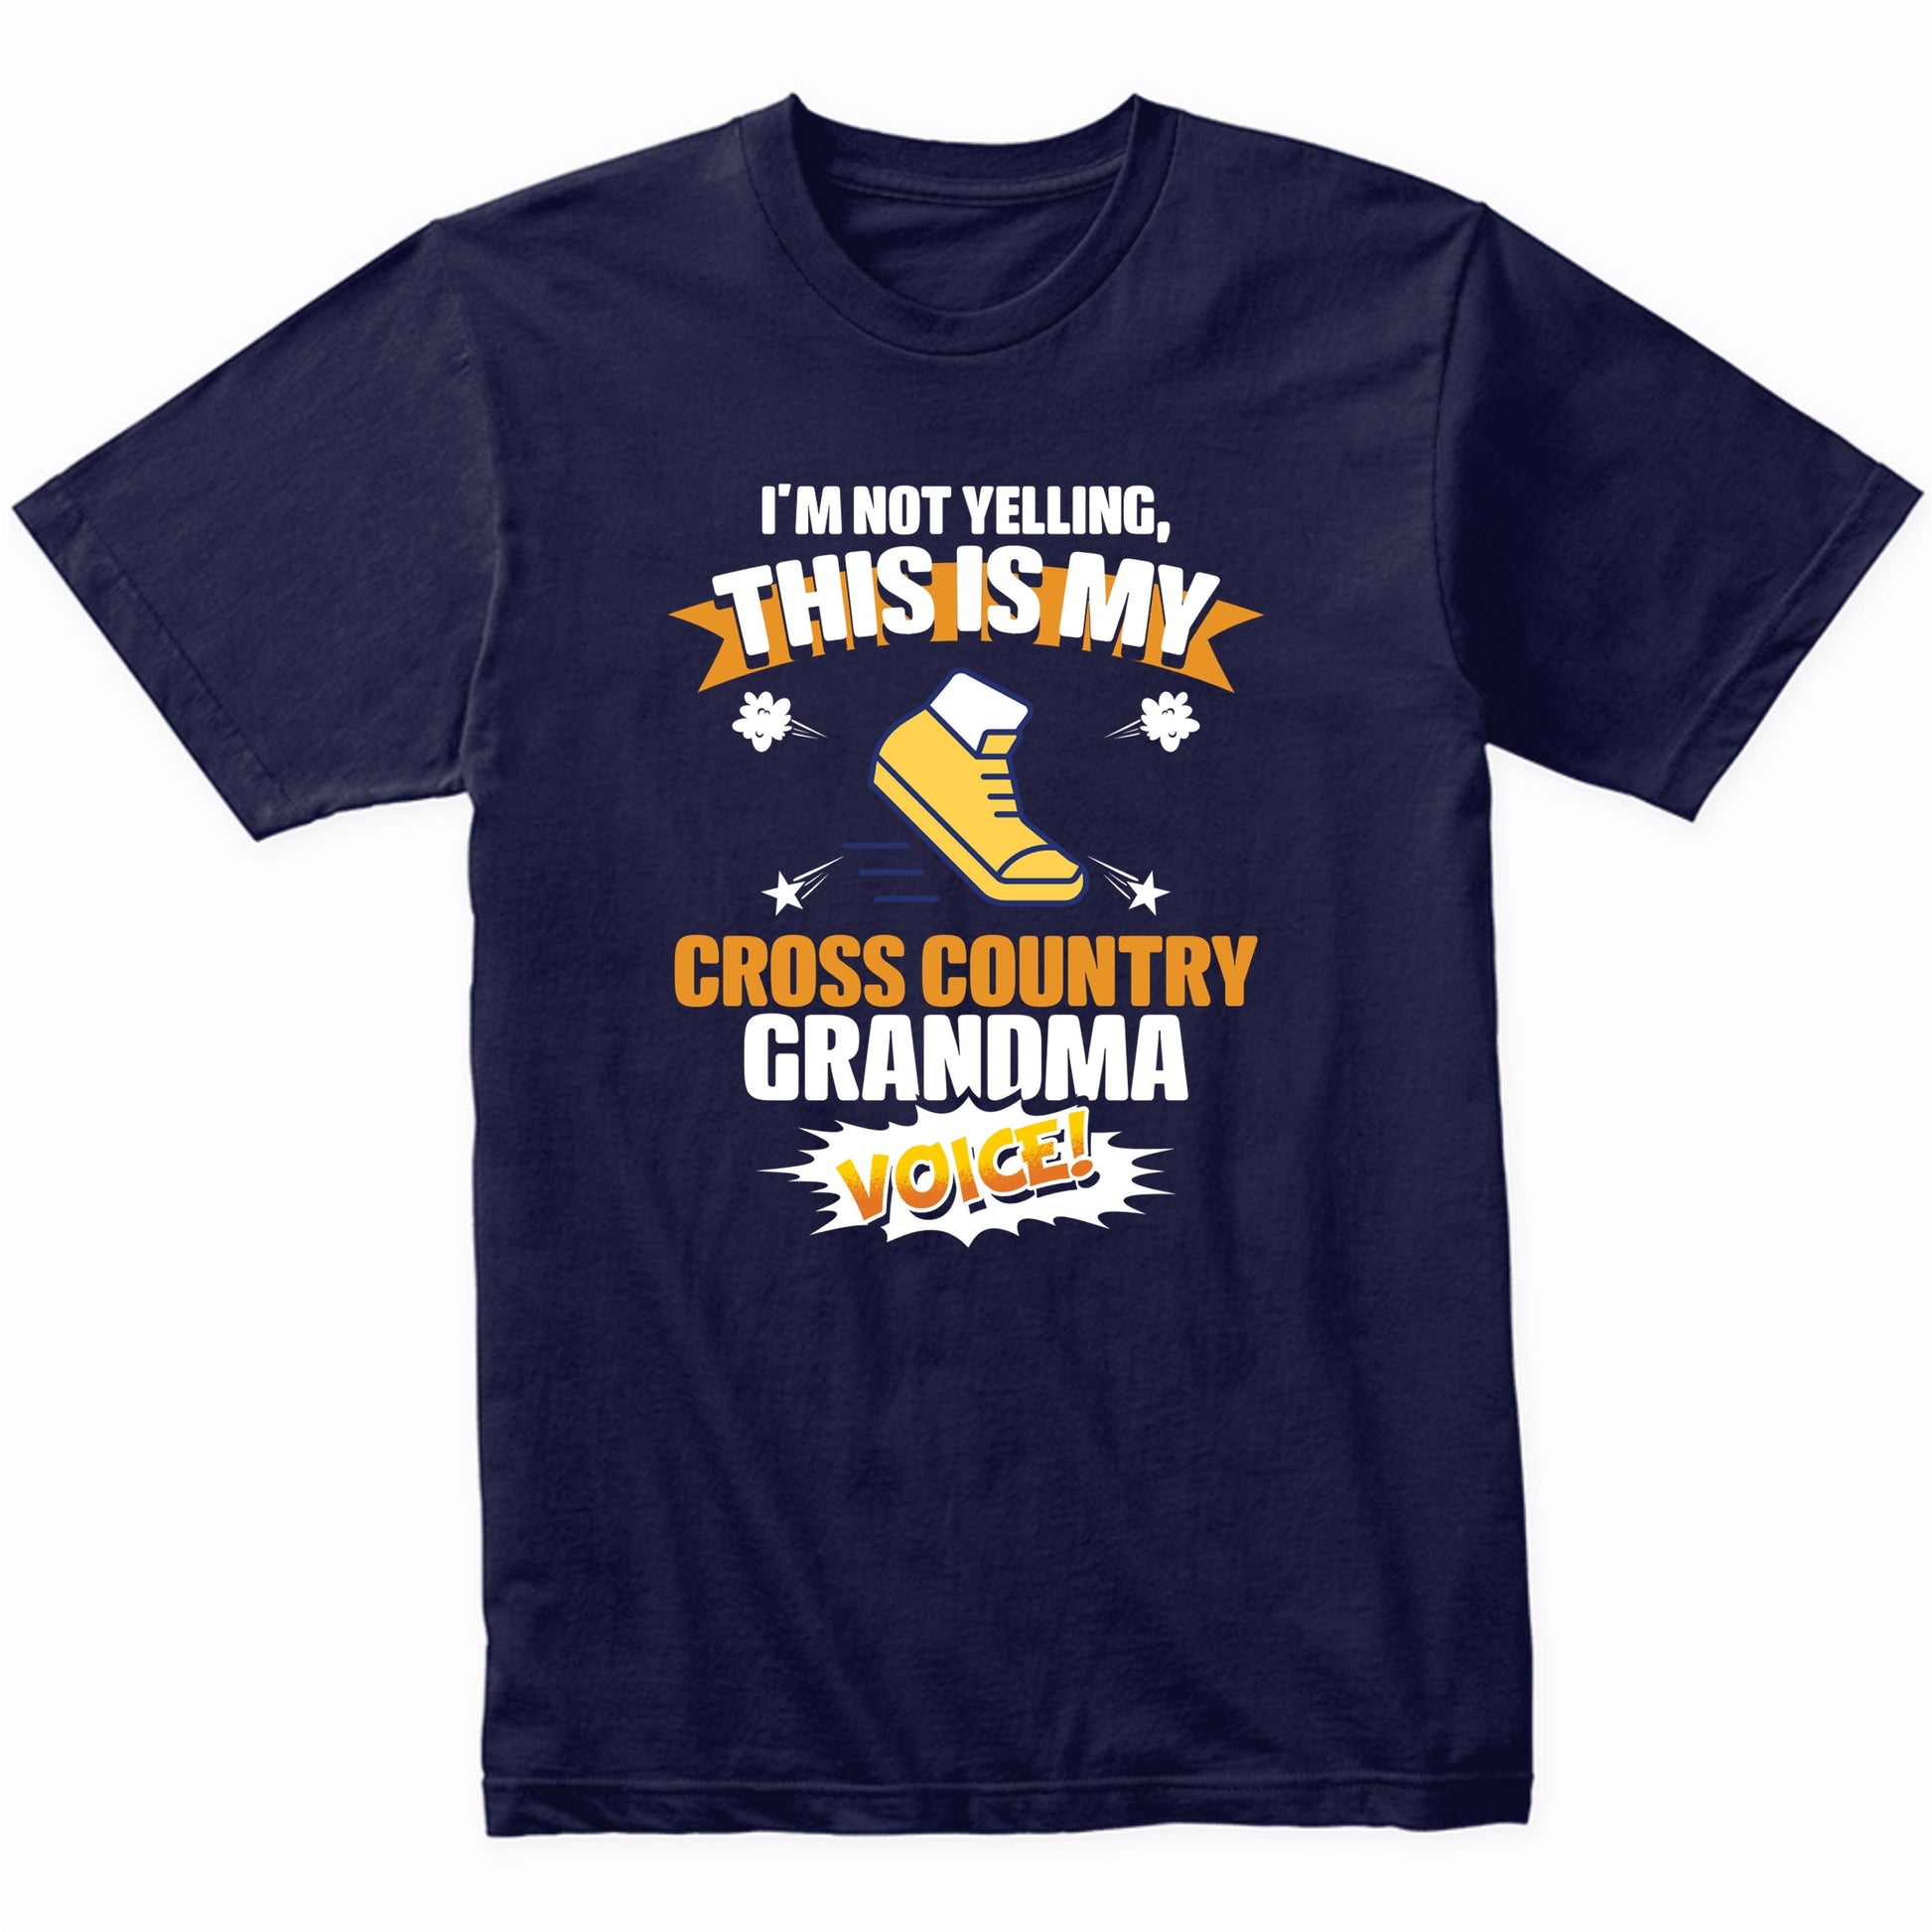 I'm Not Yelling This Is My Cross Country Grandma Voice Funny T-Shirt